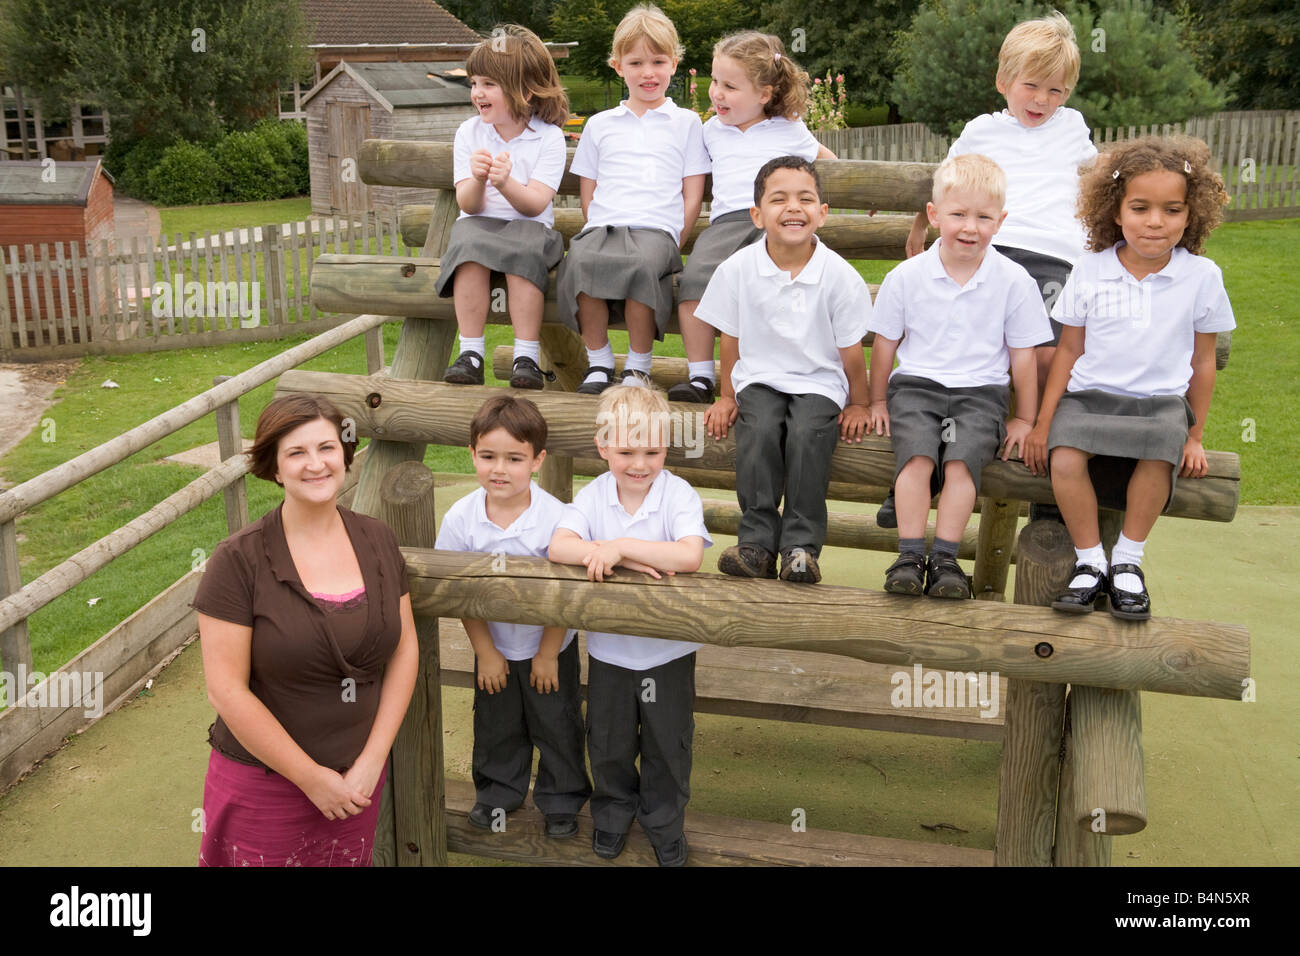 Students sitting outdoors on wooden structure with teacher standing beside them Stock Photo